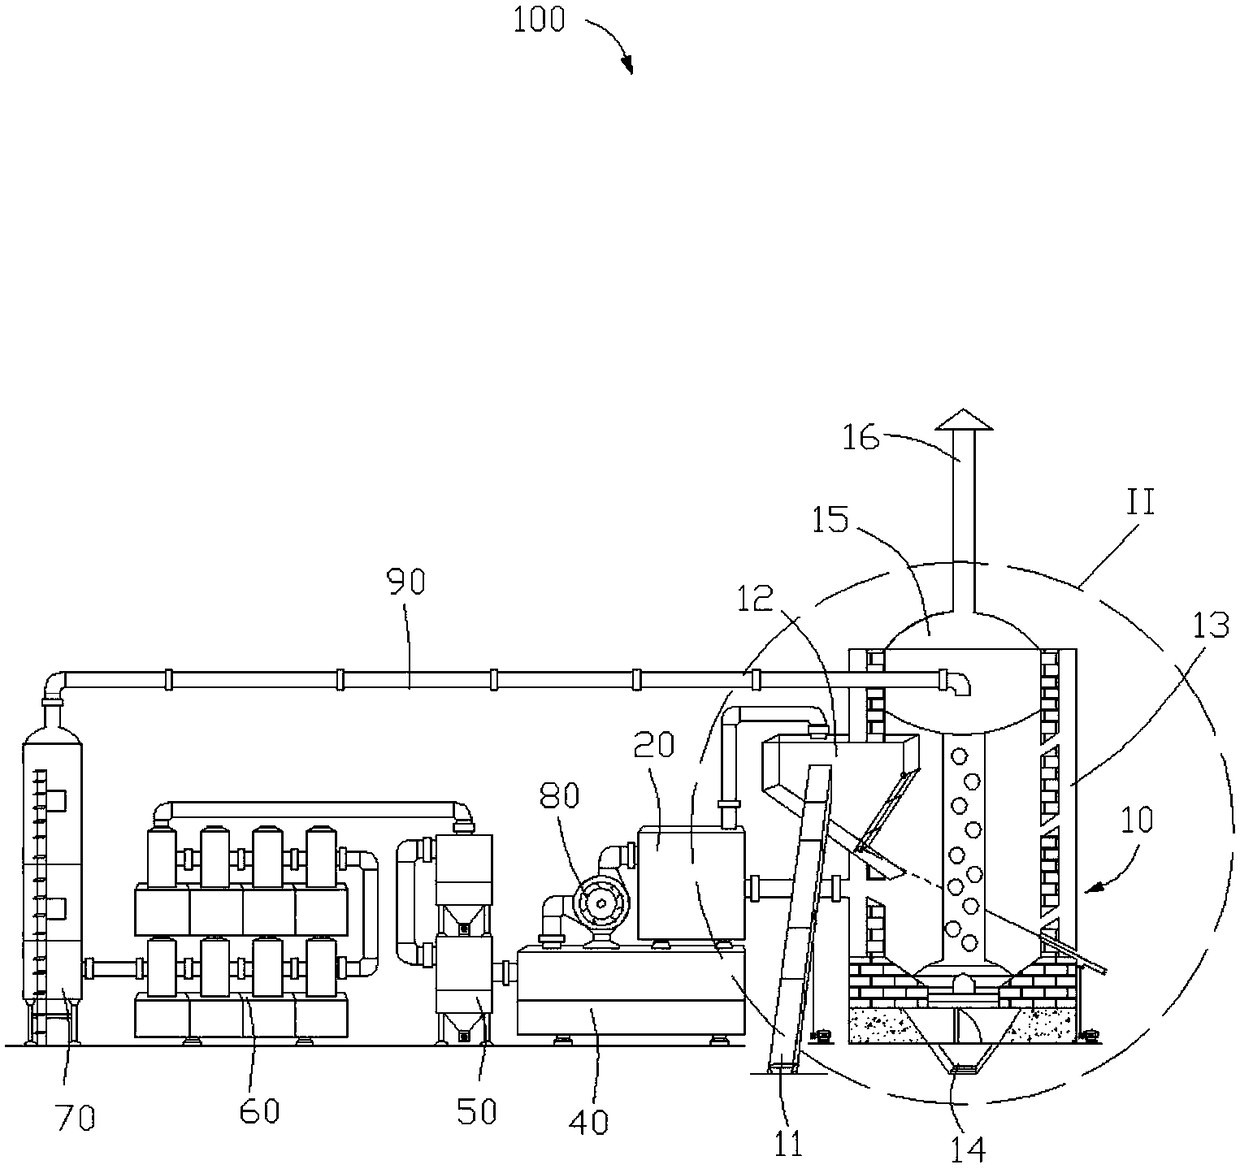 A convection dedusting device and smokeless garbage incineration system